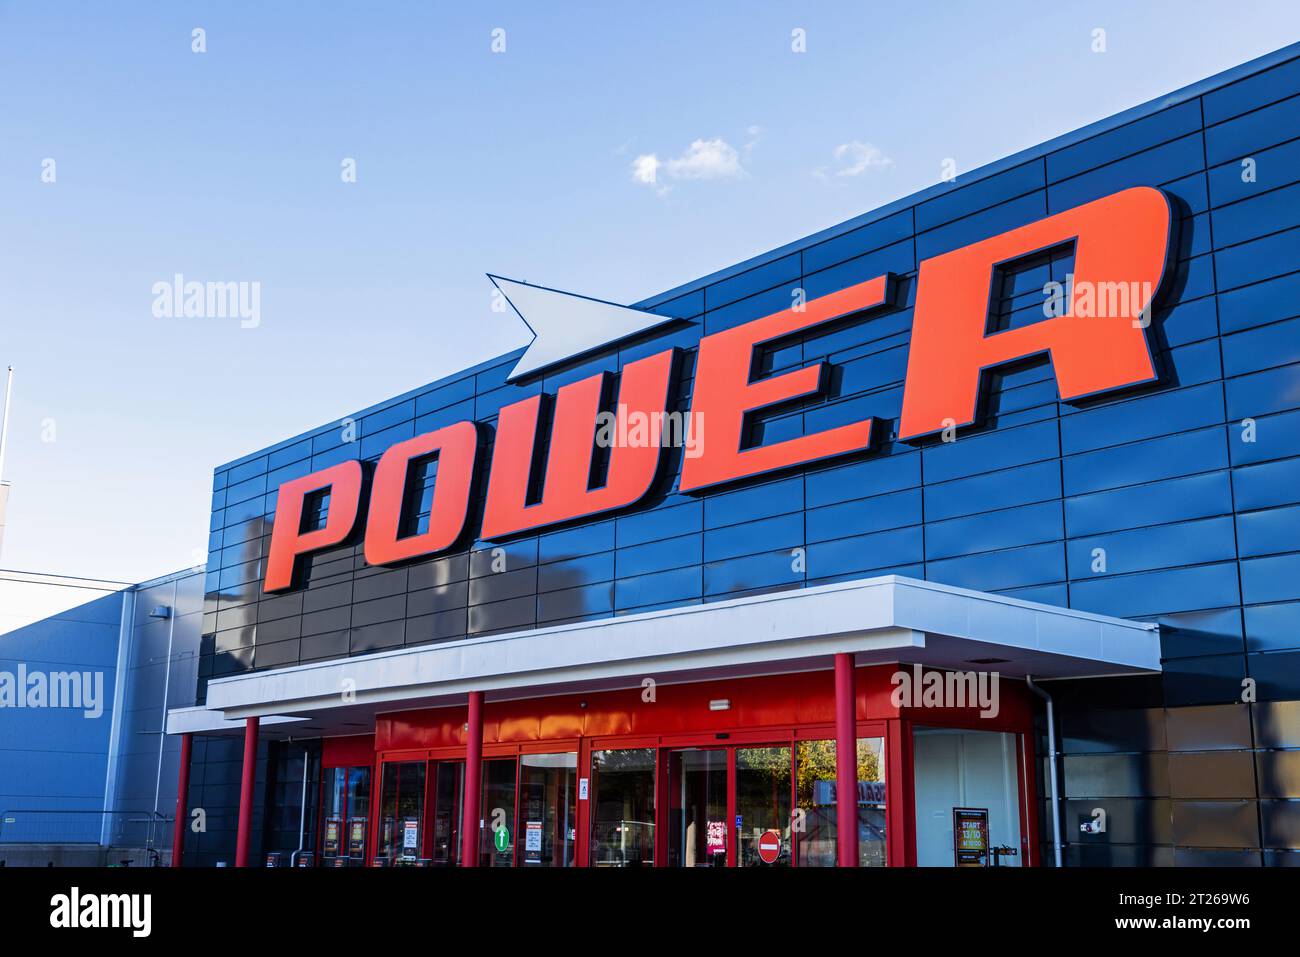 Signs and symbols, Power department store. Power is a retail chain for home electronics owned by Norwegian Expert ASA. The company has 29 department stores located in Sweden. These were taken over by Power when Media Markt chose to leave Sweden. Stock Photo